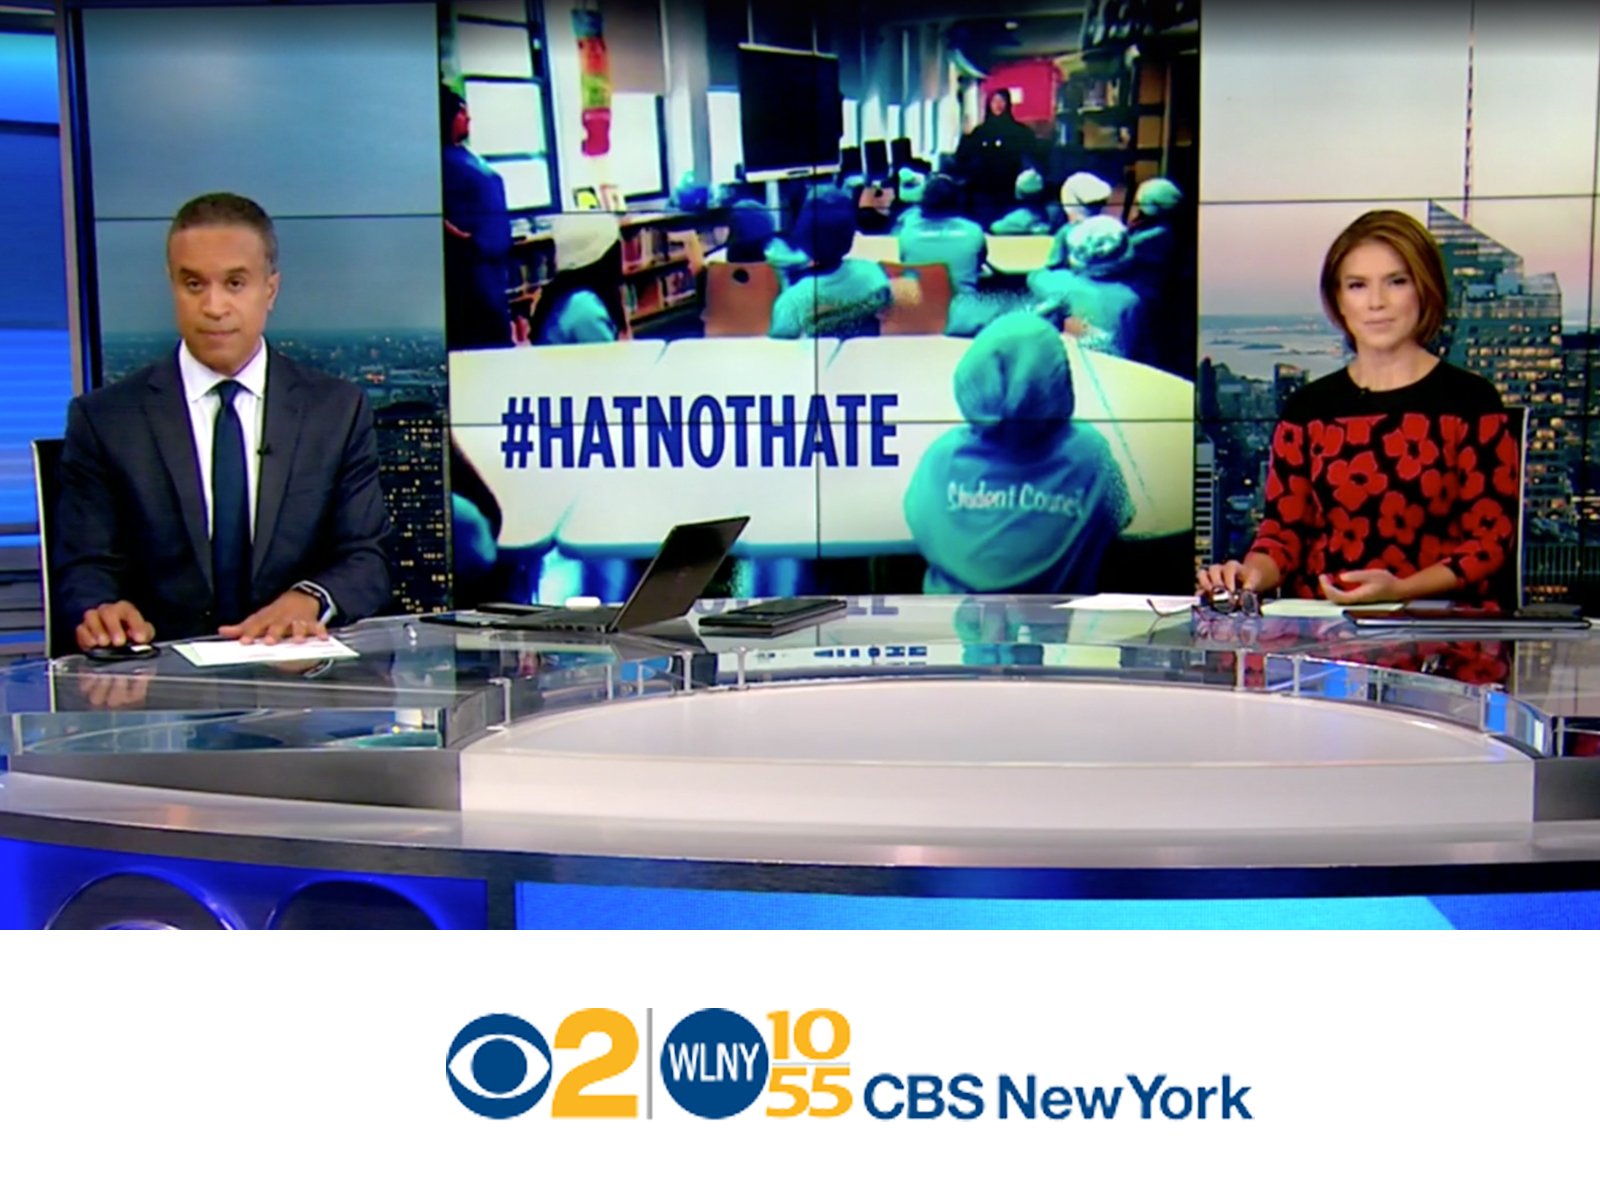 Screenshot from CBS New York news story about #HatNotHate